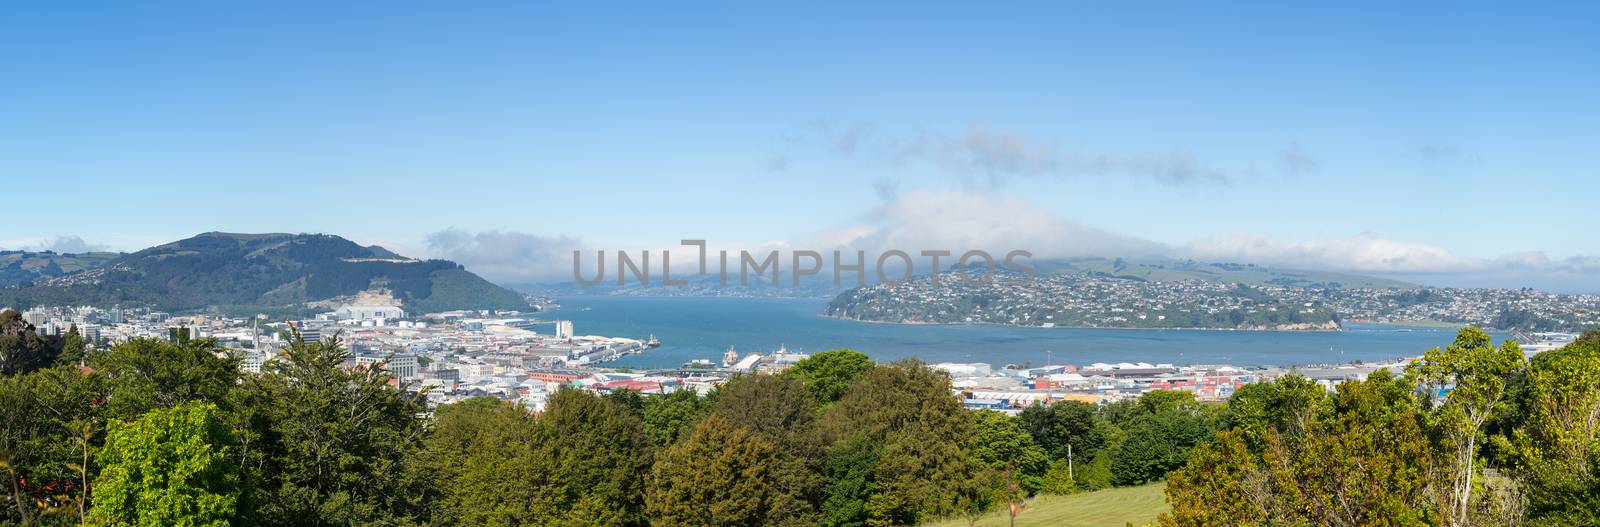 Broad panoramic landscape of the Otago Peninsula and Bay with the city of Dunedin in the foreground and clouds hanging over the mountains